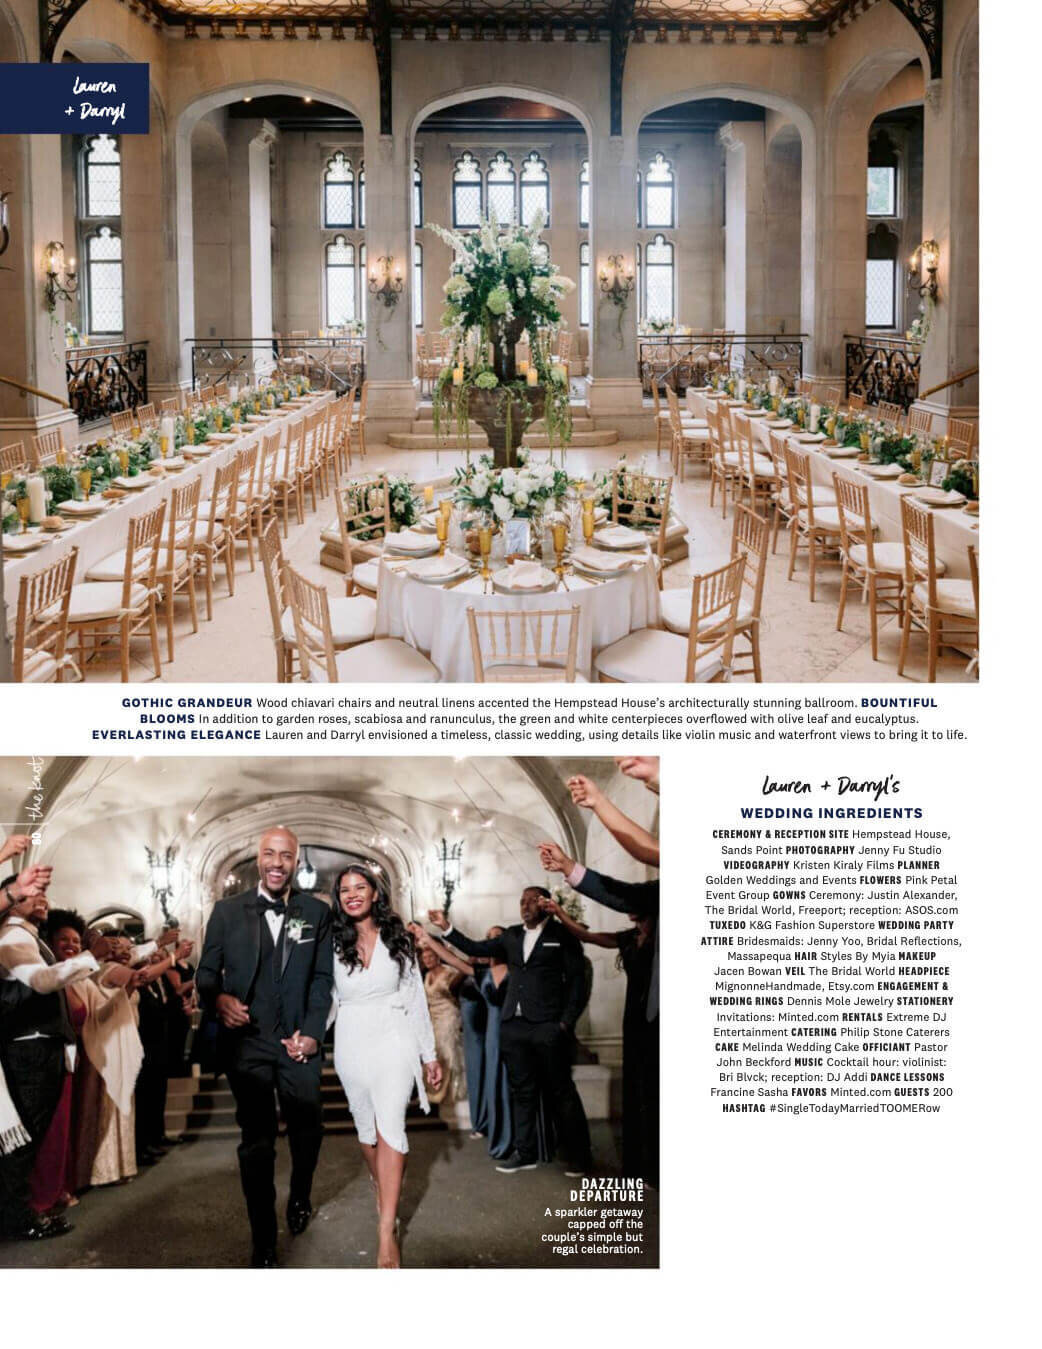 A page in The Knot Magazine where there are images of the bride and groom and the wedding venue. Image by Jenny Fu Studio